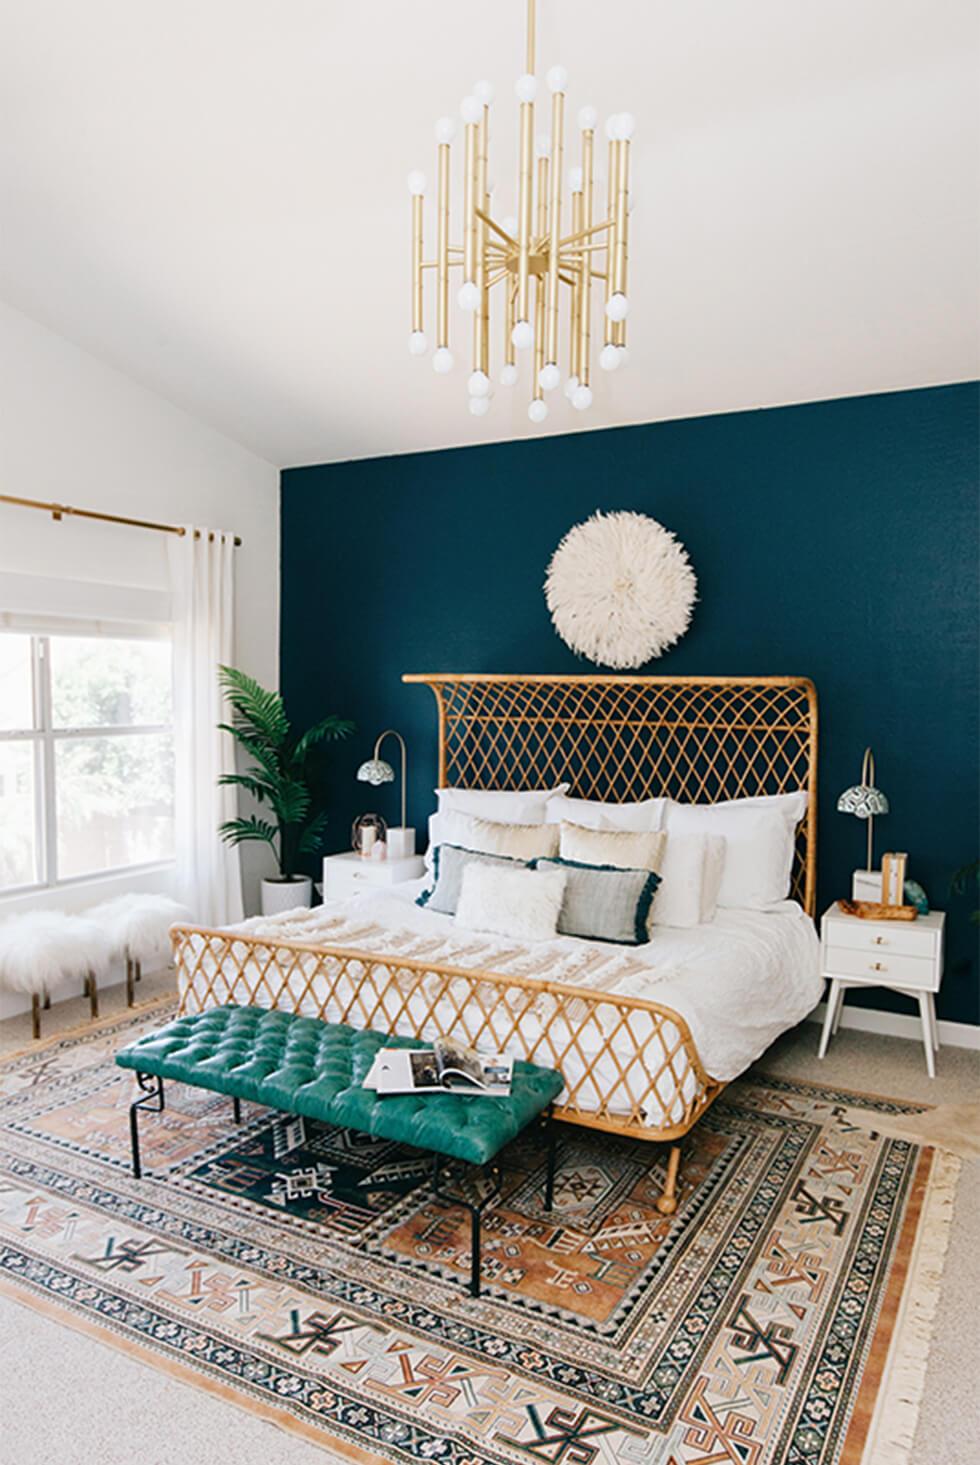 Tropical teal bedroom with a large rug, gold chandelier and statement rattan bed